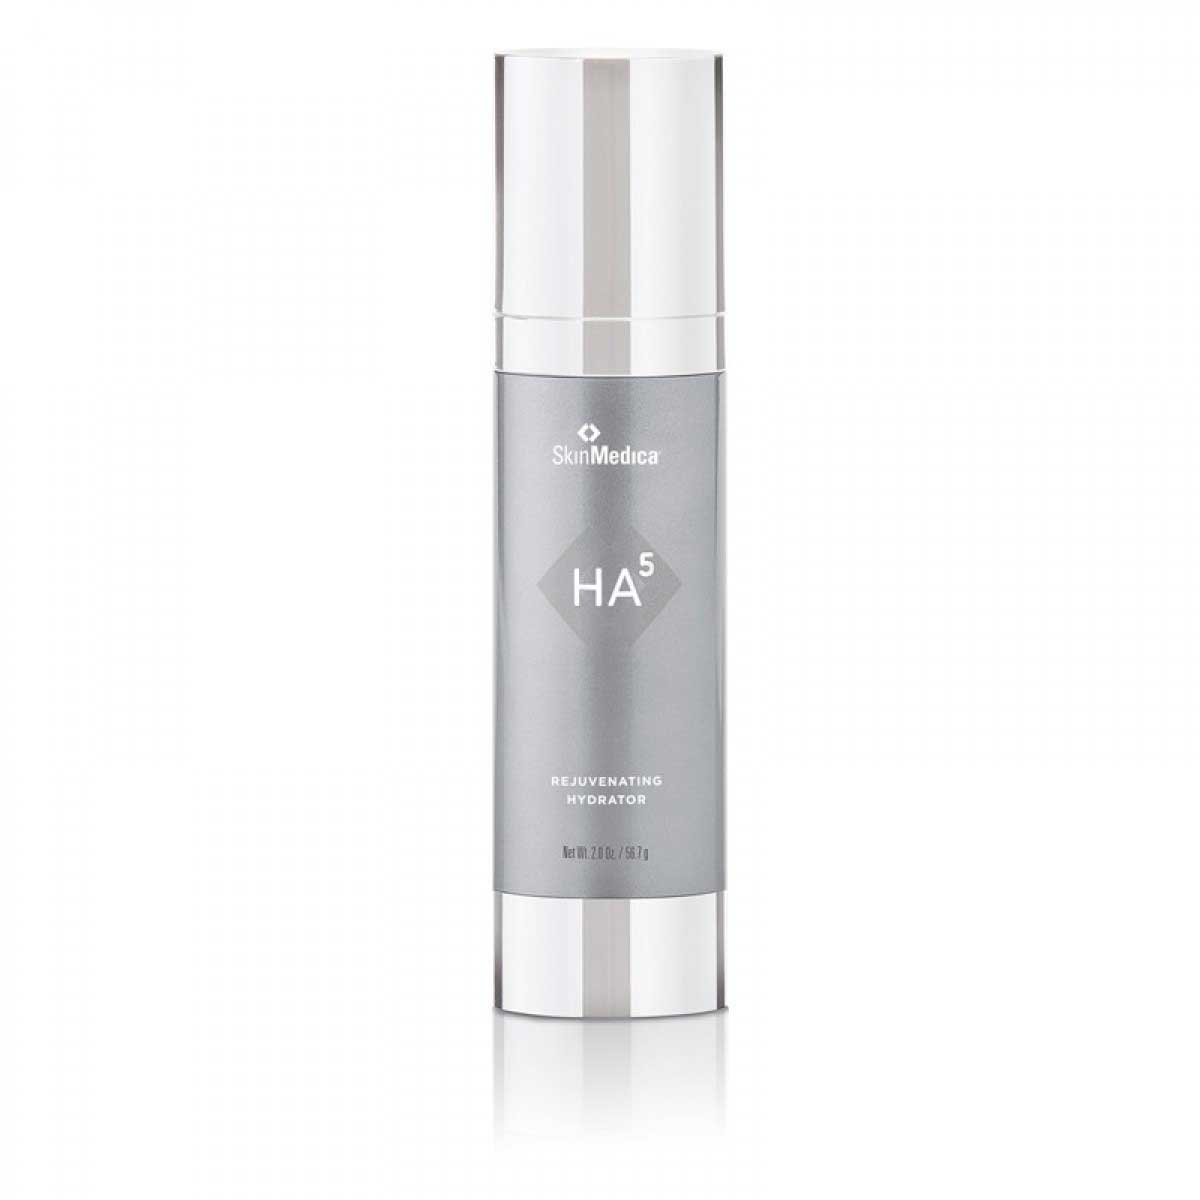 HA5 for Hydration, Improvement of Fine Lines, and Skin Texture